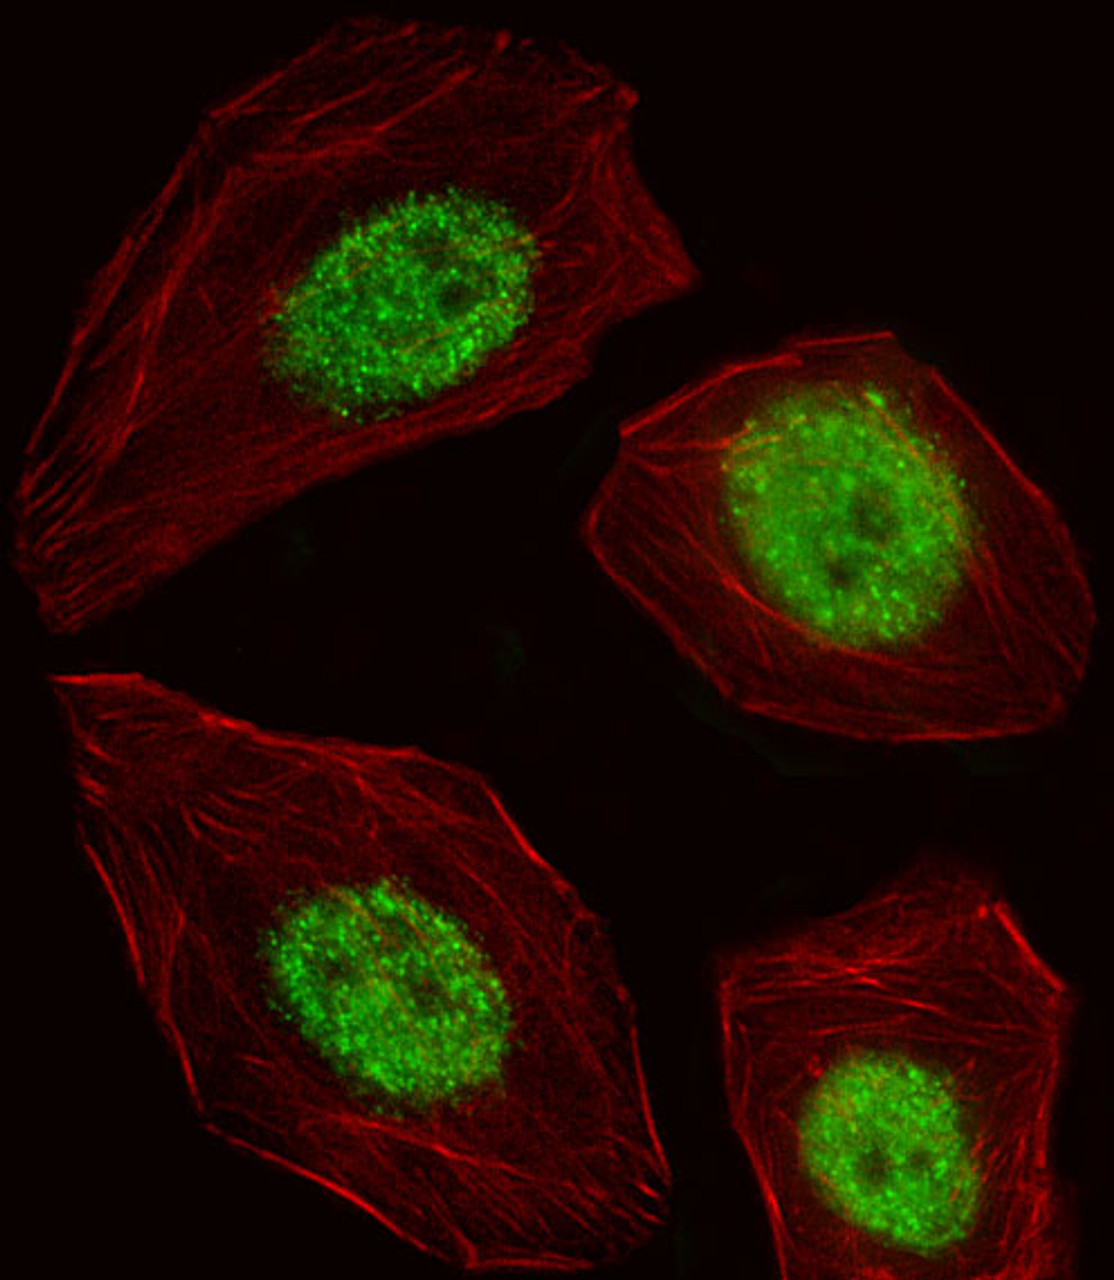 Fluorescent image of A549 cell stained with BLZF1 Antibody .A549 cells were fixed with 4% PFA (20 min) , permeabilized with Triton X-100 (0.1%, 10 min) , then incubated with BLZF1 primary antibody (1:25) . For secondary antibody, Alexa Fluor 488 conjugated donkey anti-rabbit antibody (green) was used (1:400) .Cytoplasmic actin was counterstained with Alexa Fluor 555 (red) conjugated Phalloidin (7units/ml) .BLZF1 immunoreactivity is localized to Nucleus significantly.